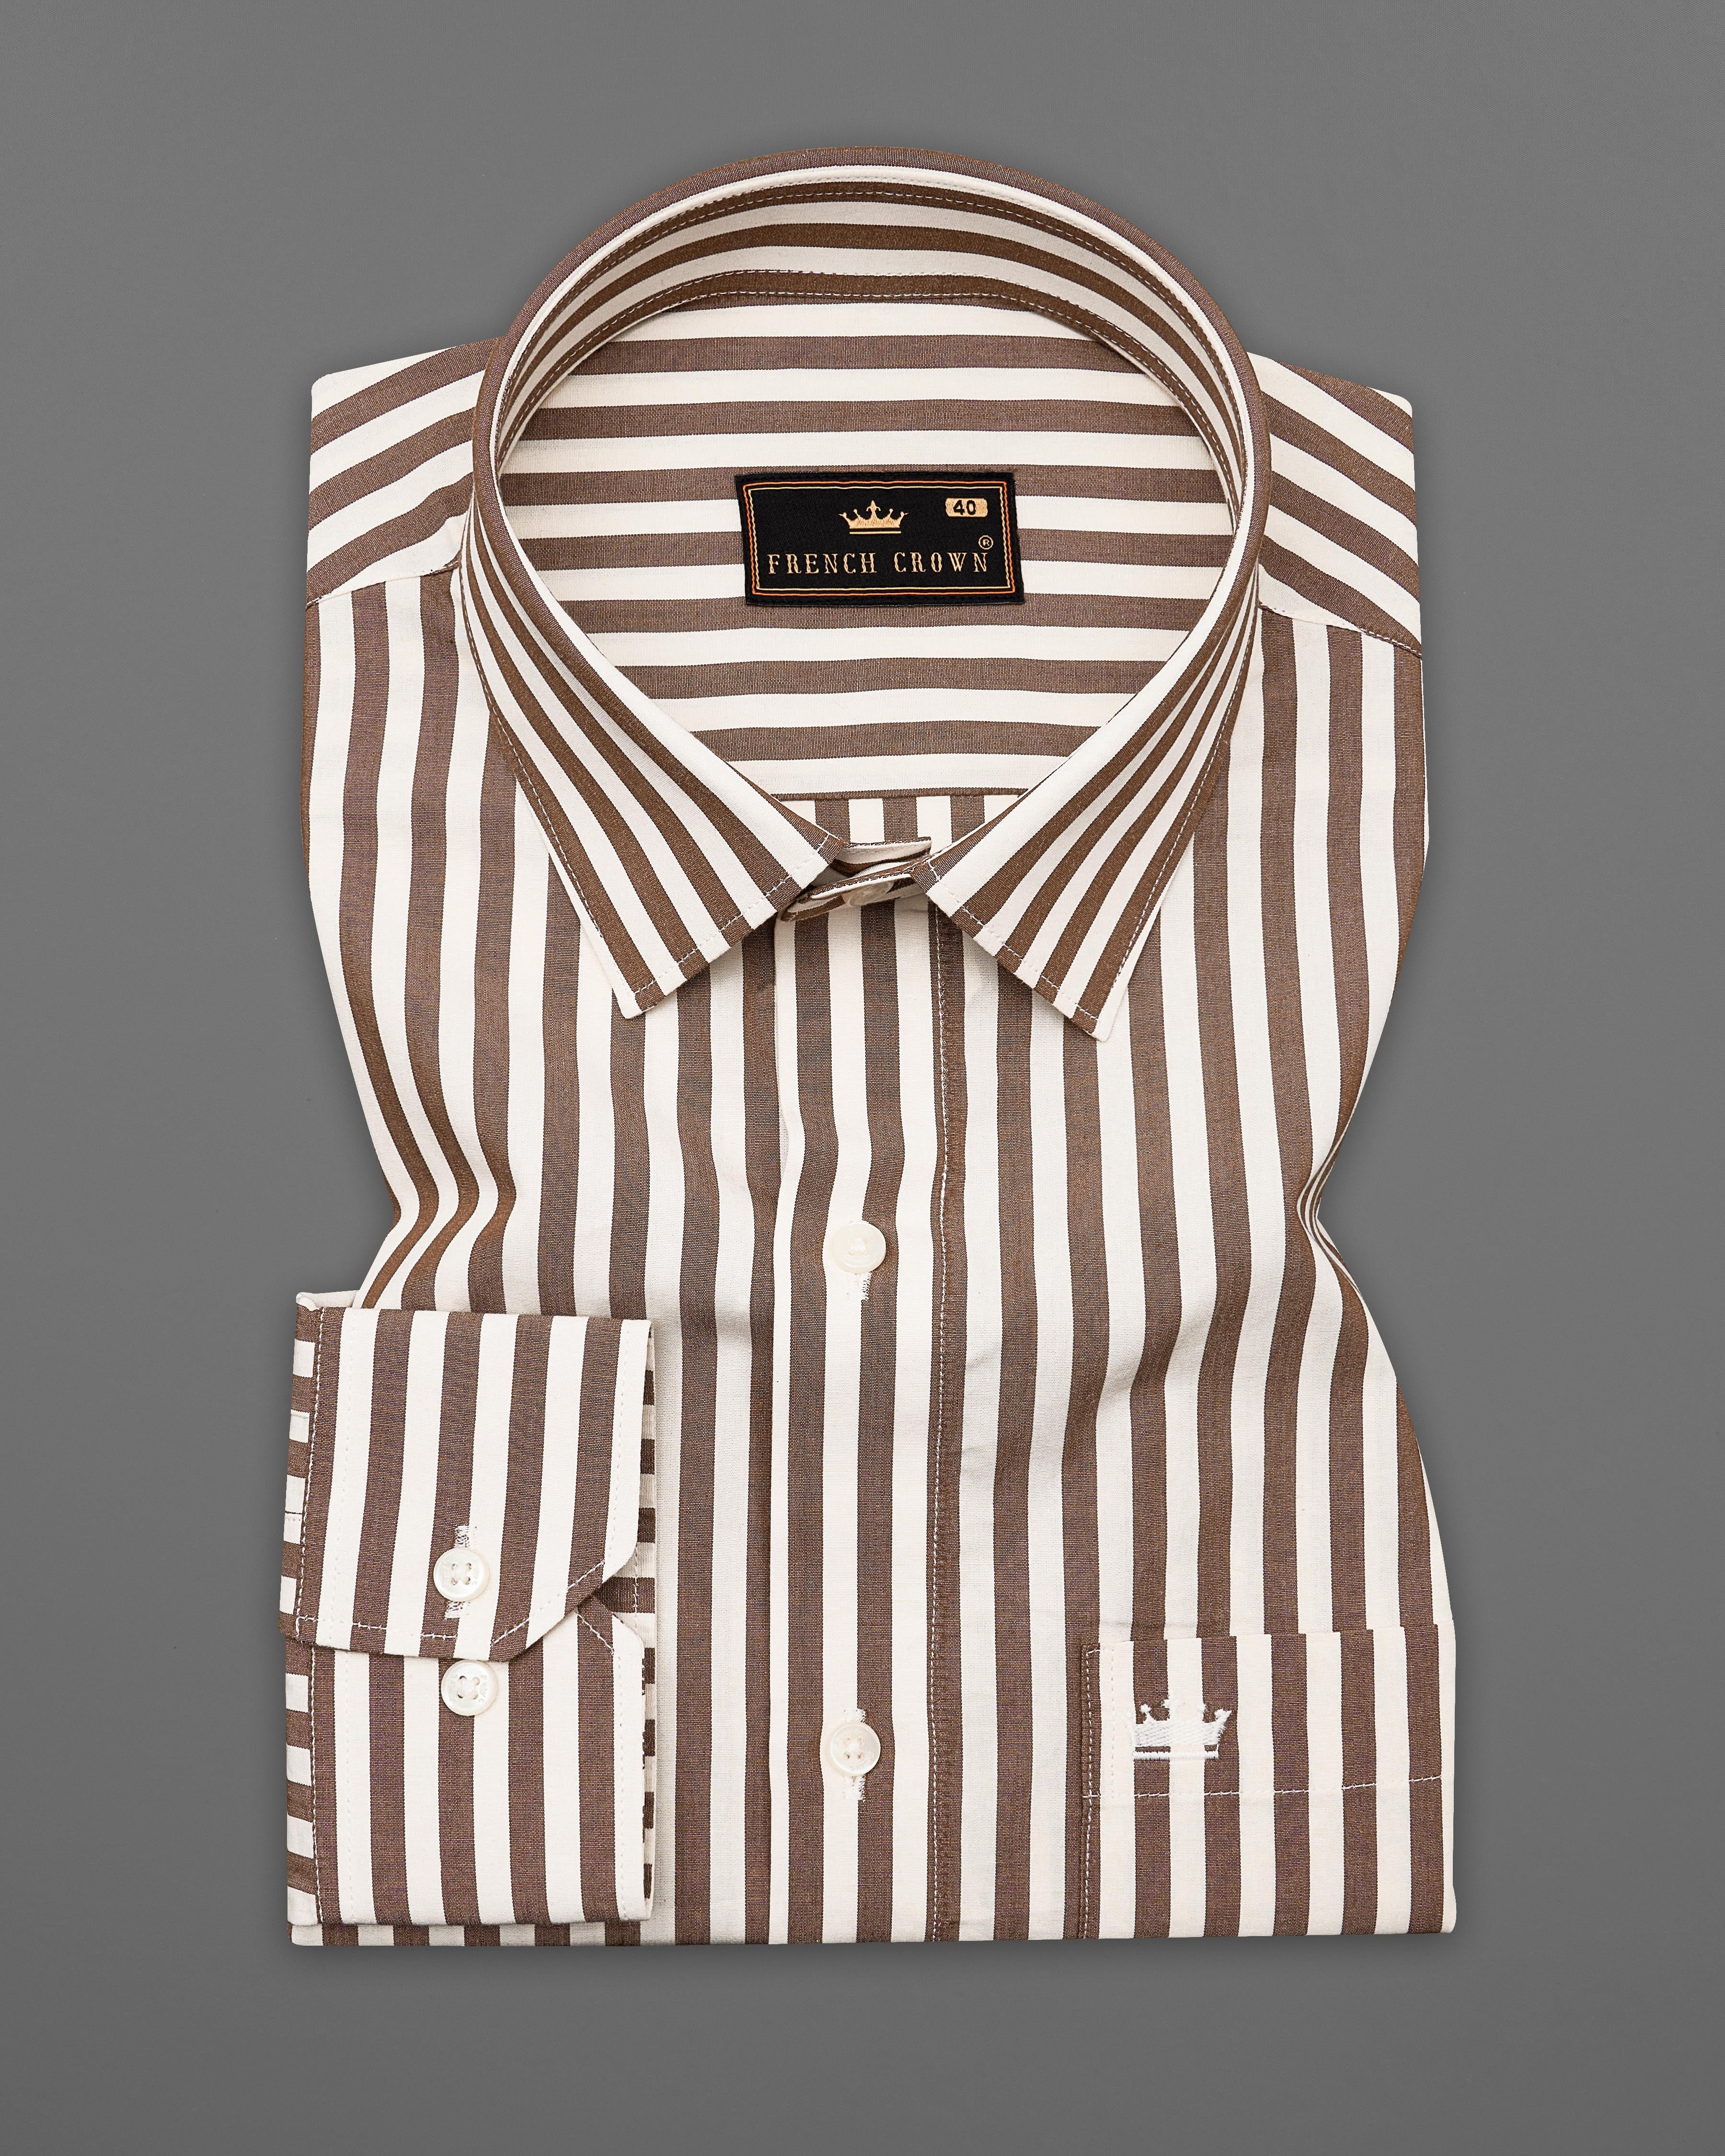 Puce with Gainsboro Brown Striped Premium Cotton Shirt